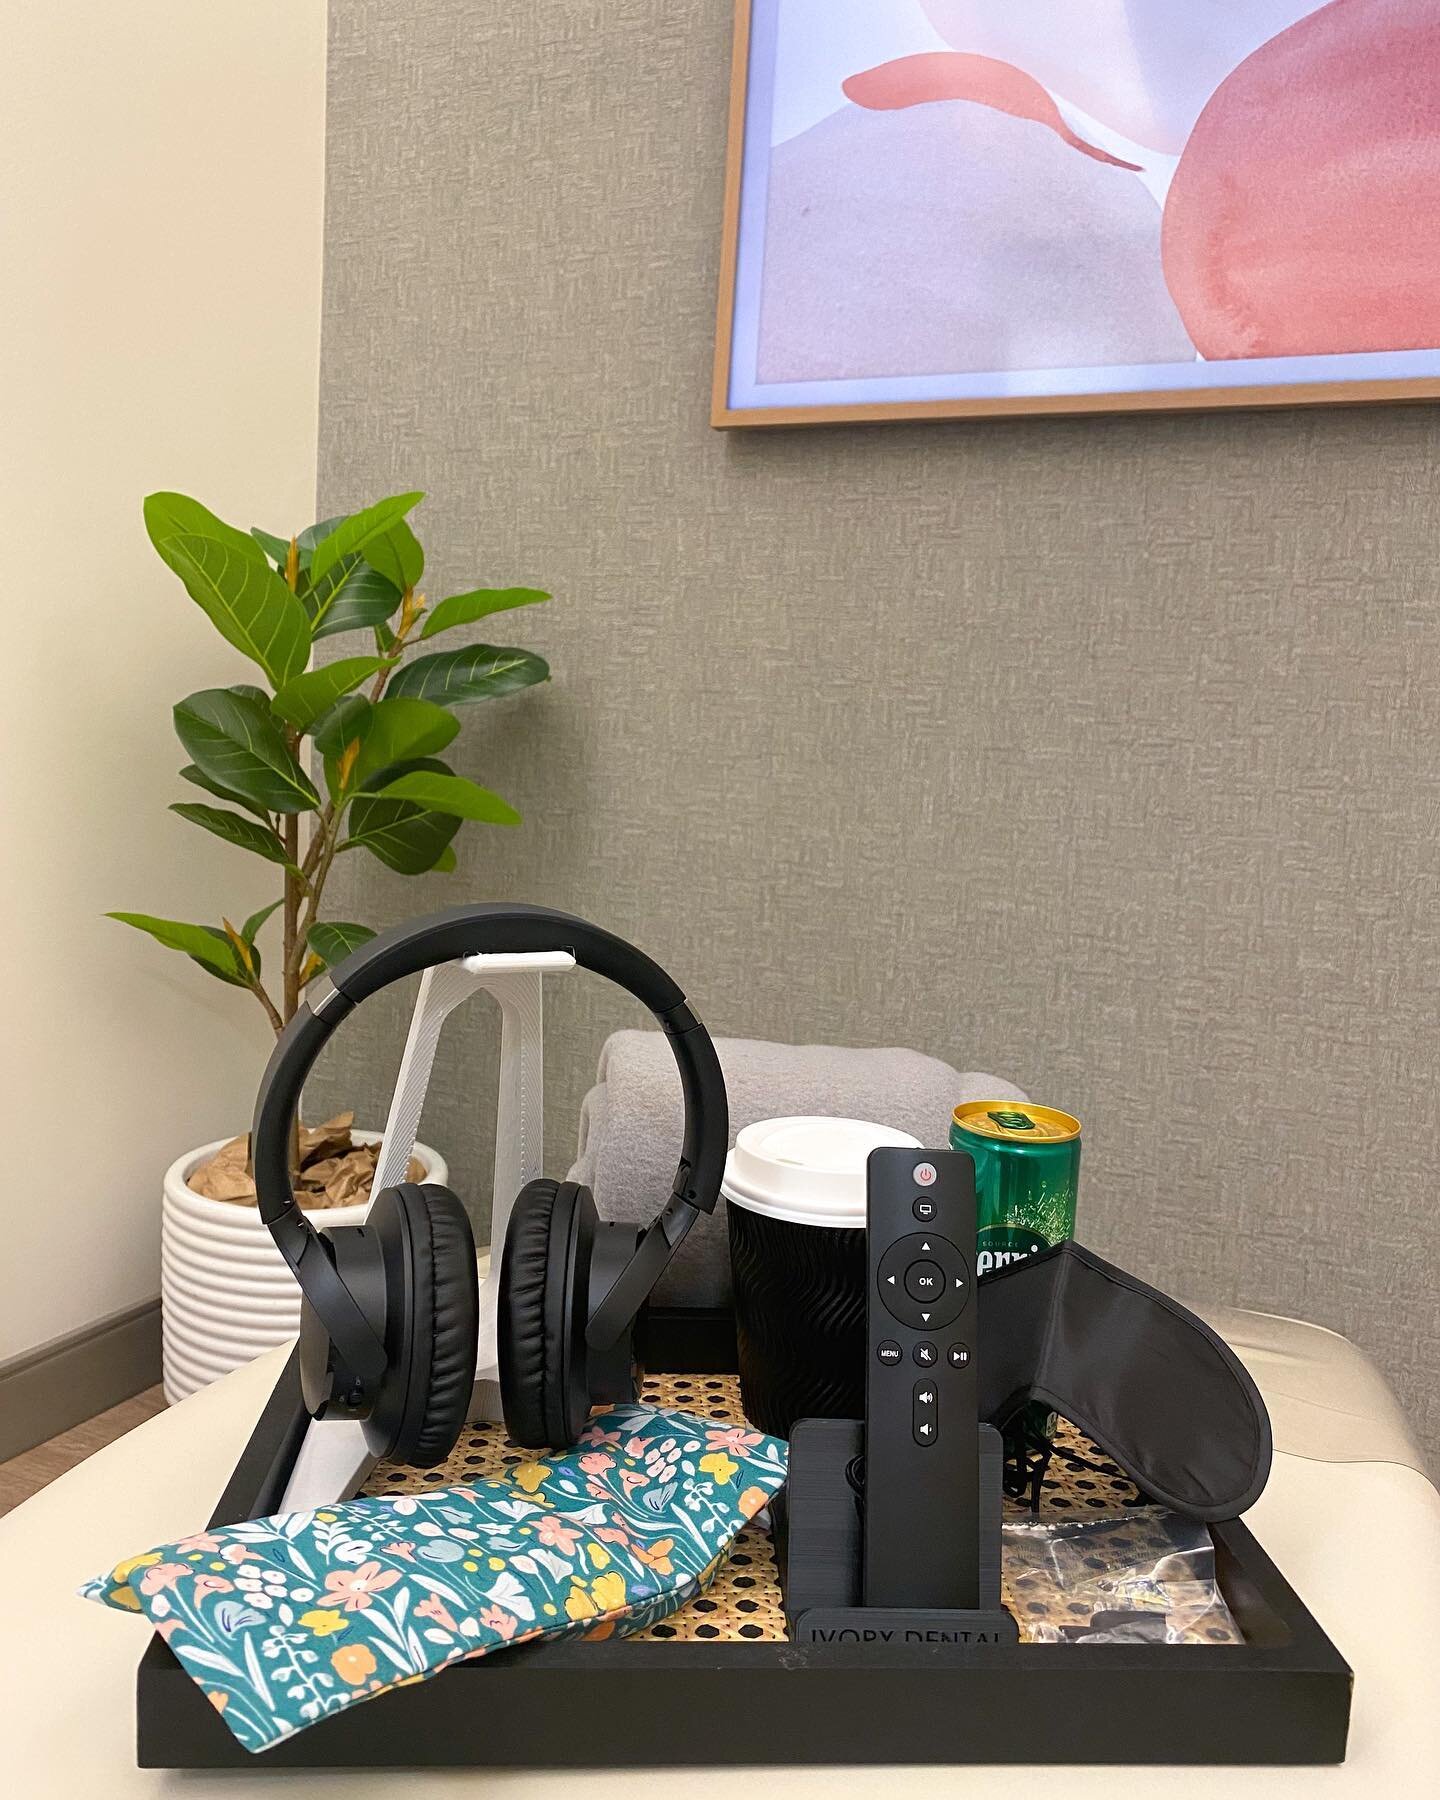 Did you know you can customize your dental experience at our office? It all starts from when you book your appointment to sitting down in our chair. We prepare your room and offer a range of amenities to make your dental visit more comfortable! Check